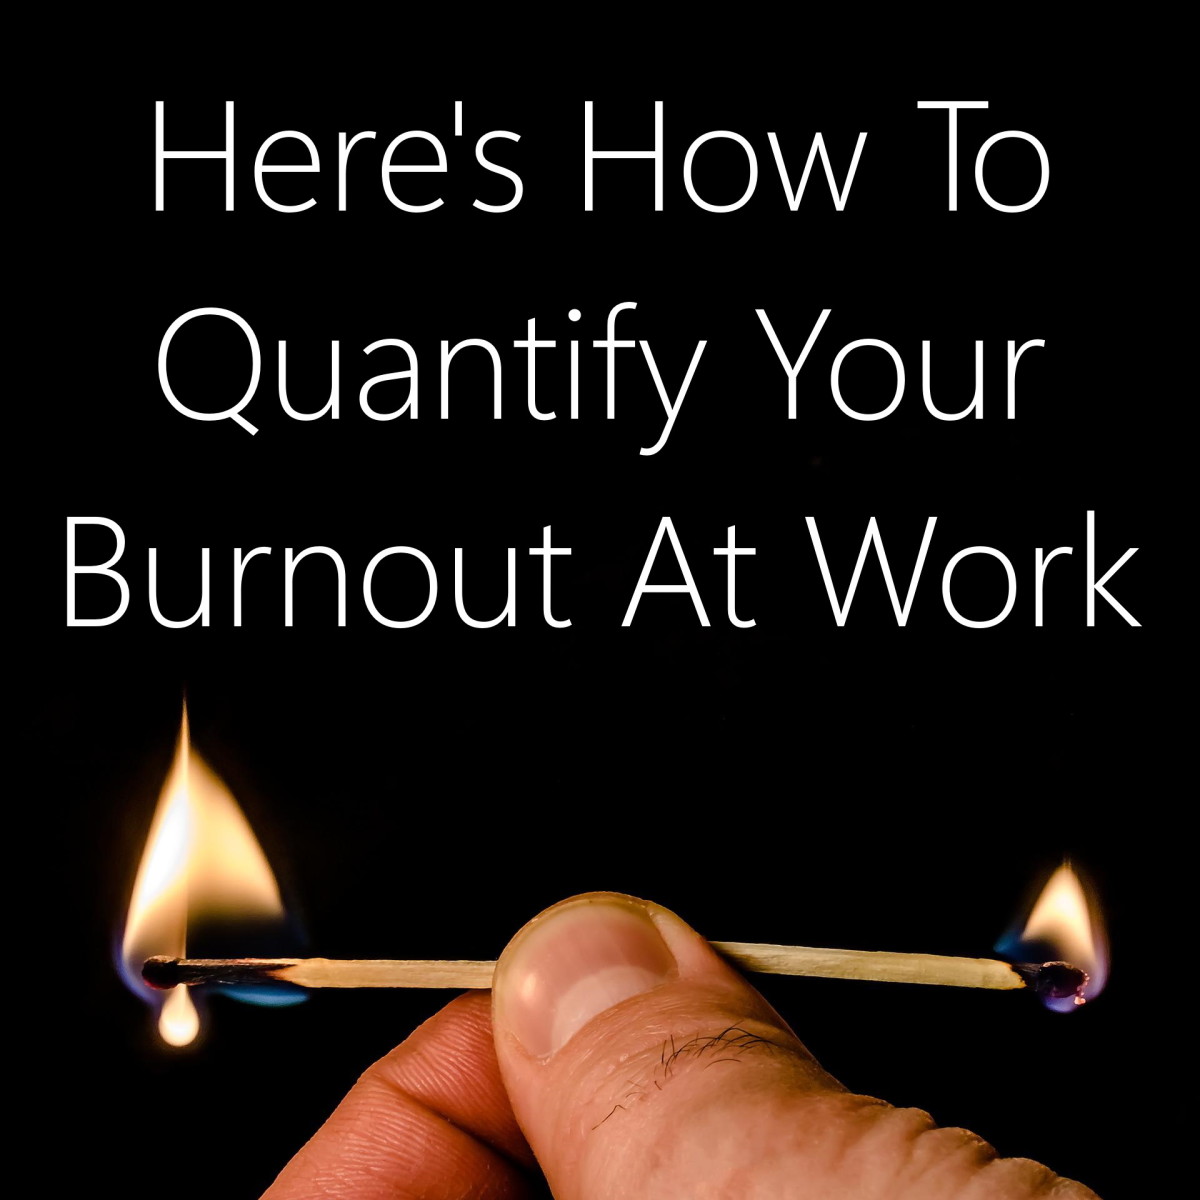 Here's How to Quantify Your Burnout at Work